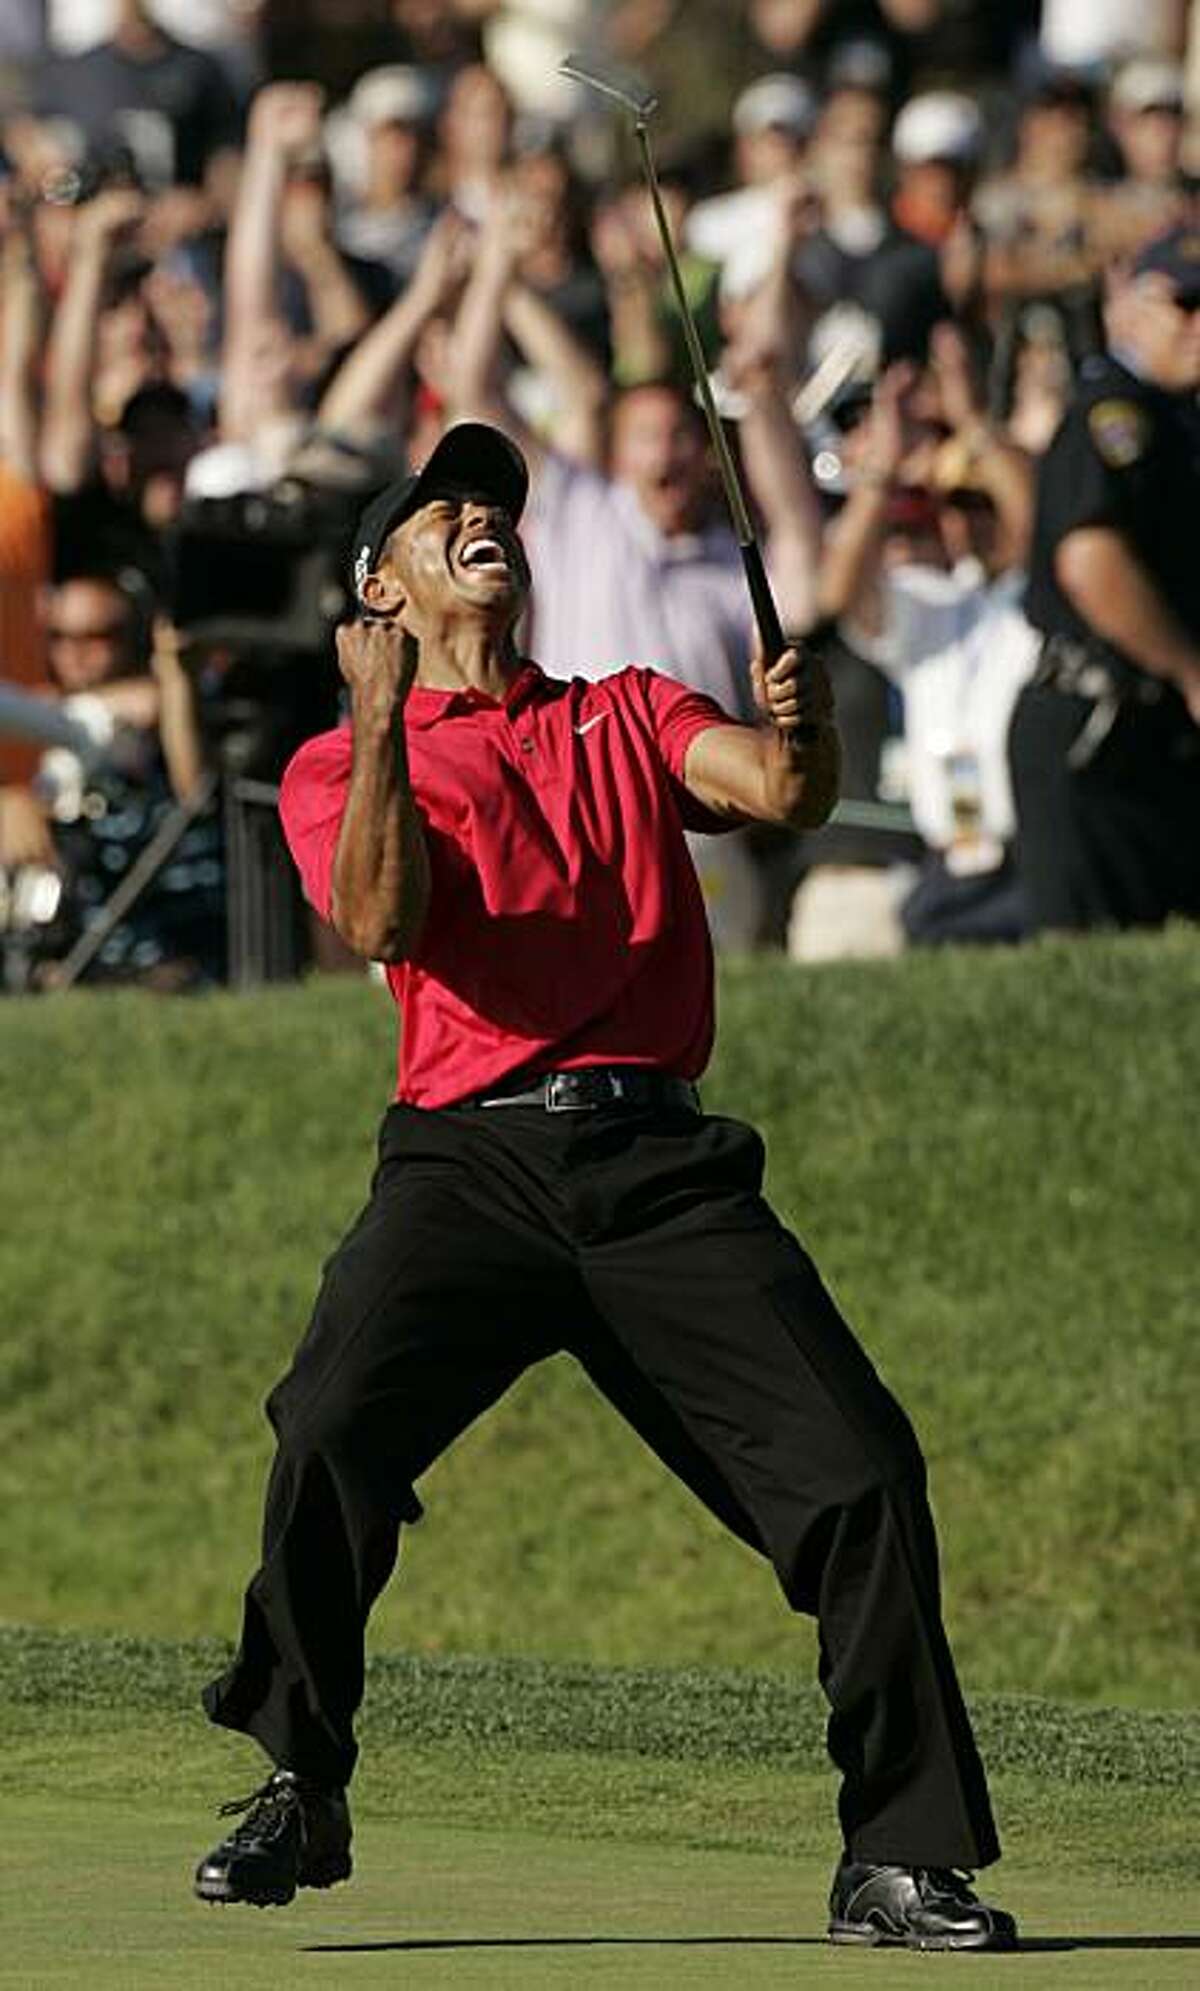 This is a June 15, 2008, file photo showing Tiger Woods reacting after sinking a birdie putt on the 18th green forcing a playoff against Rocco Mediate during the fourth round of the US Open championship at Torrey Pines Golf Course in San Diego. The only measure of golf is the score on the card. Woods had the lowest score 54 times on the PGA Tour this decade, including 12 majors. He won at a staggering rate of 30 percent, with nine victories by at least eight shots. Such dominance is what makes Woods a candidate for The Associated Press' Athlete of the Decade.